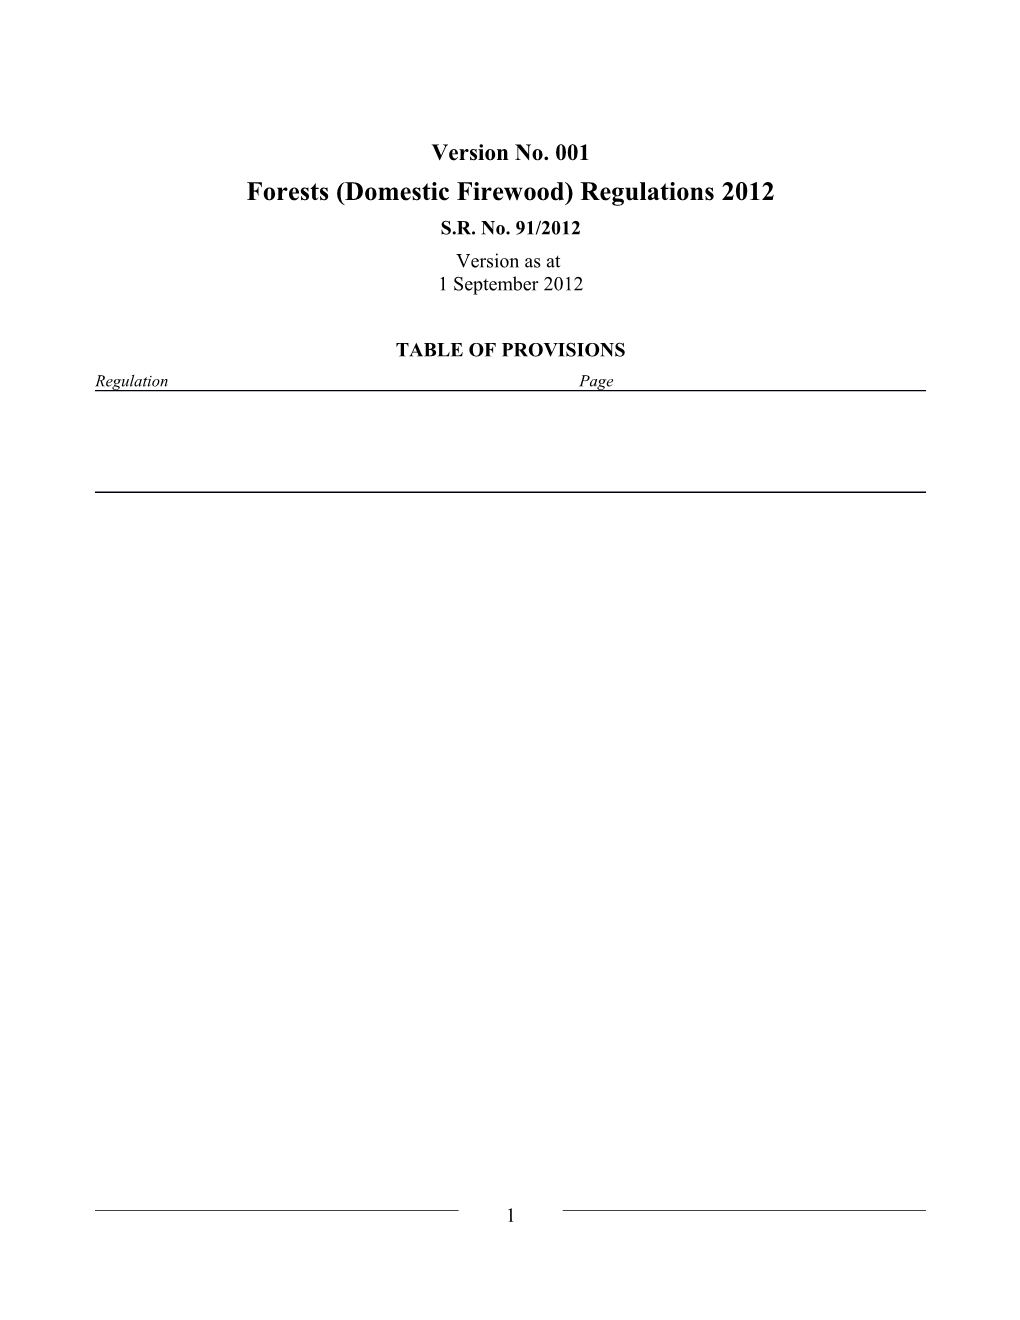 Forests (Domestic Firewood) Regulations 2012